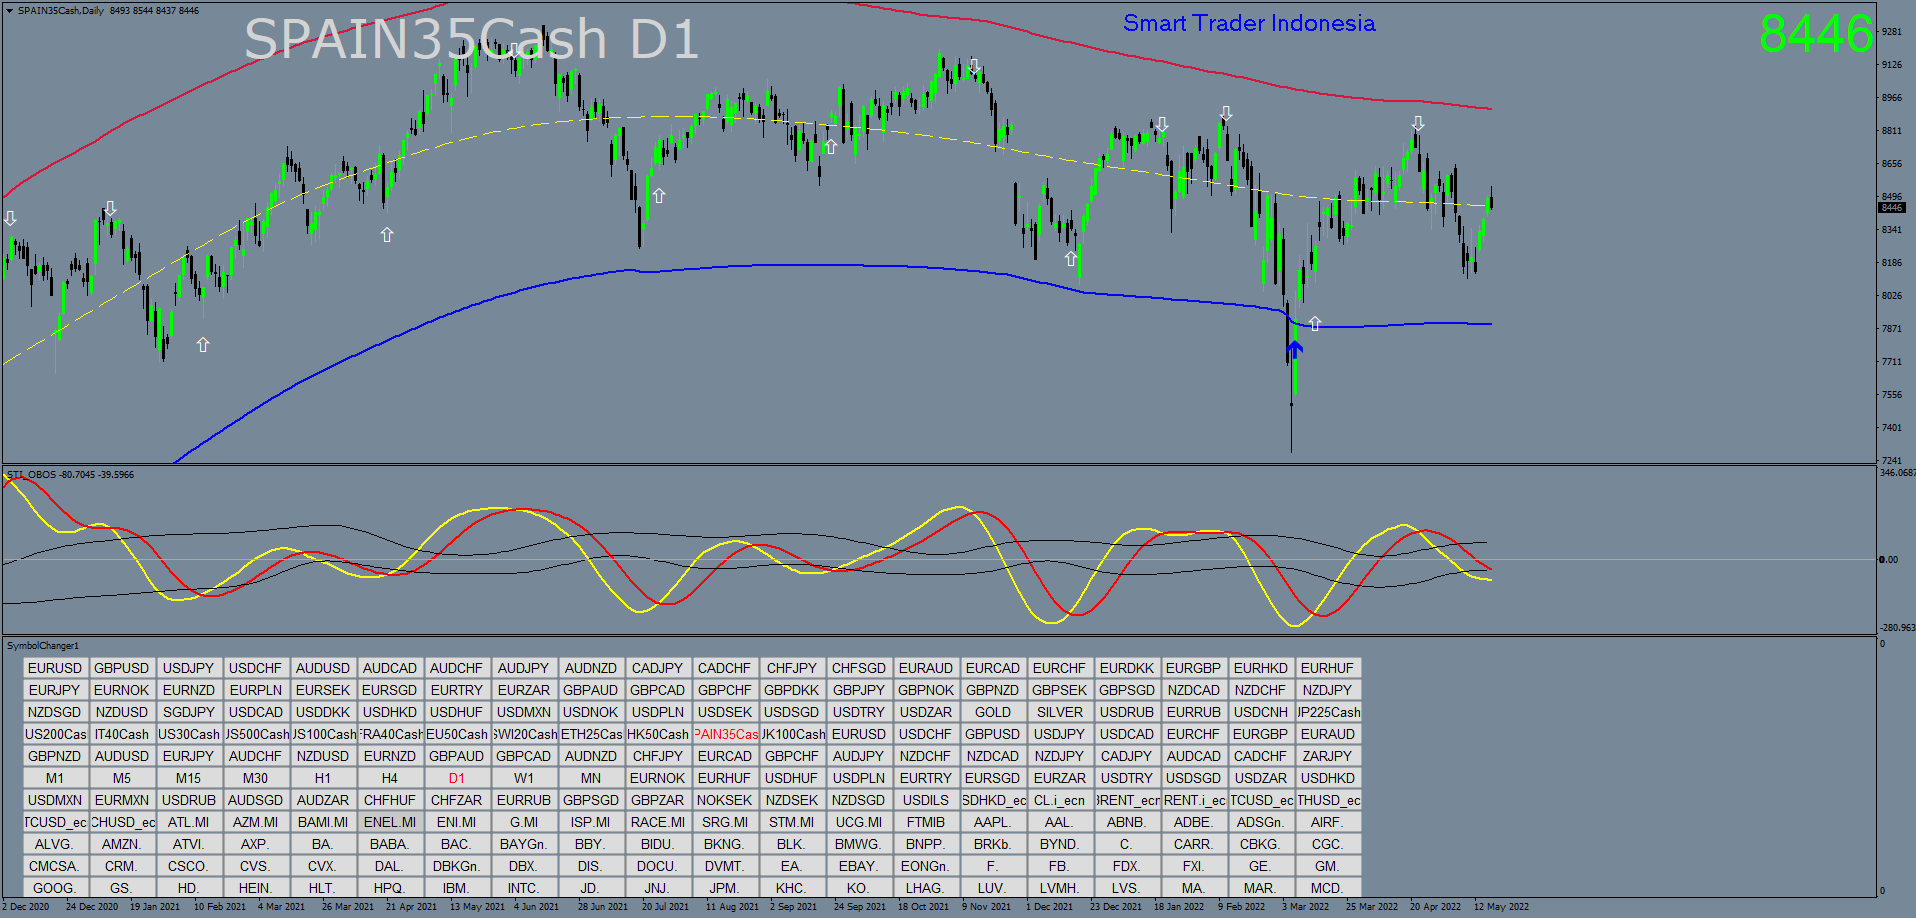 spain35cash-d1-trading-point-of (7).png